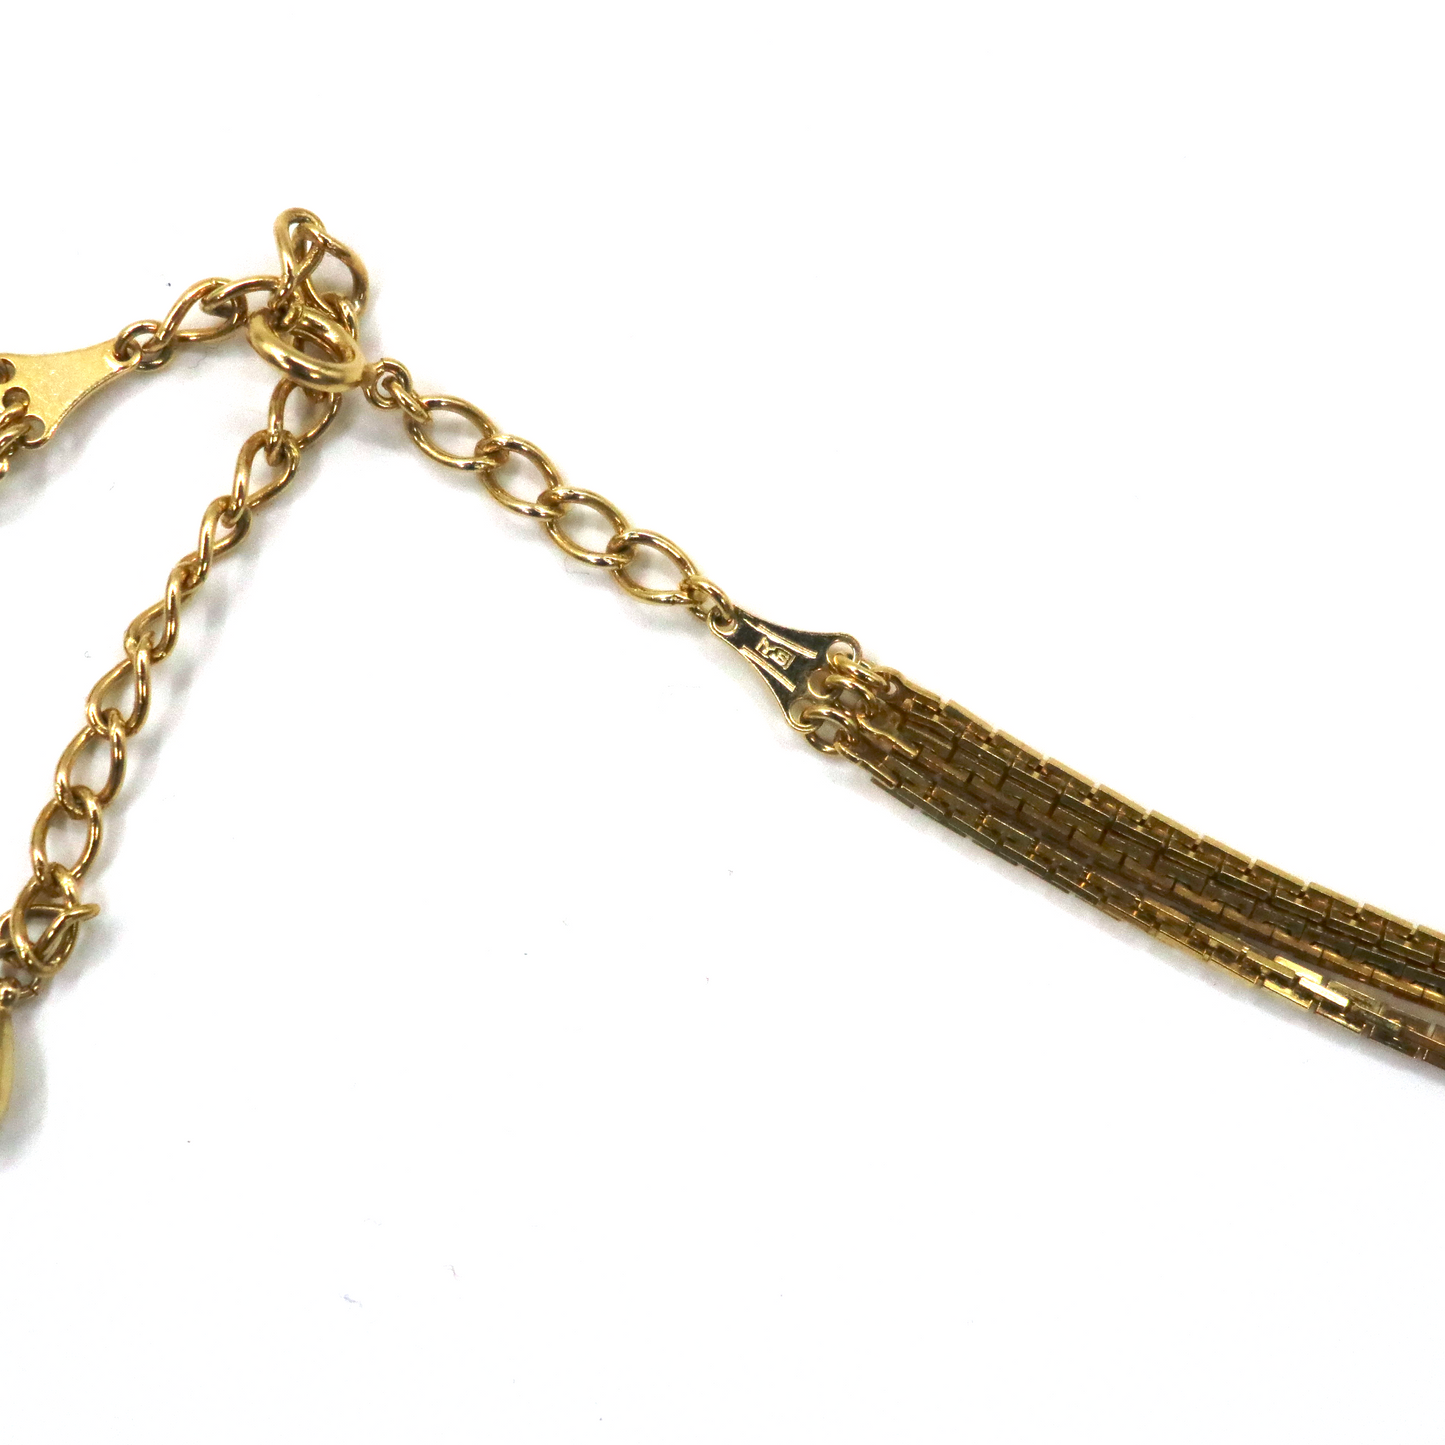 VINTAGE Gold Chain Necklaces 3連 ゴールドチェーンネックレス 80cm